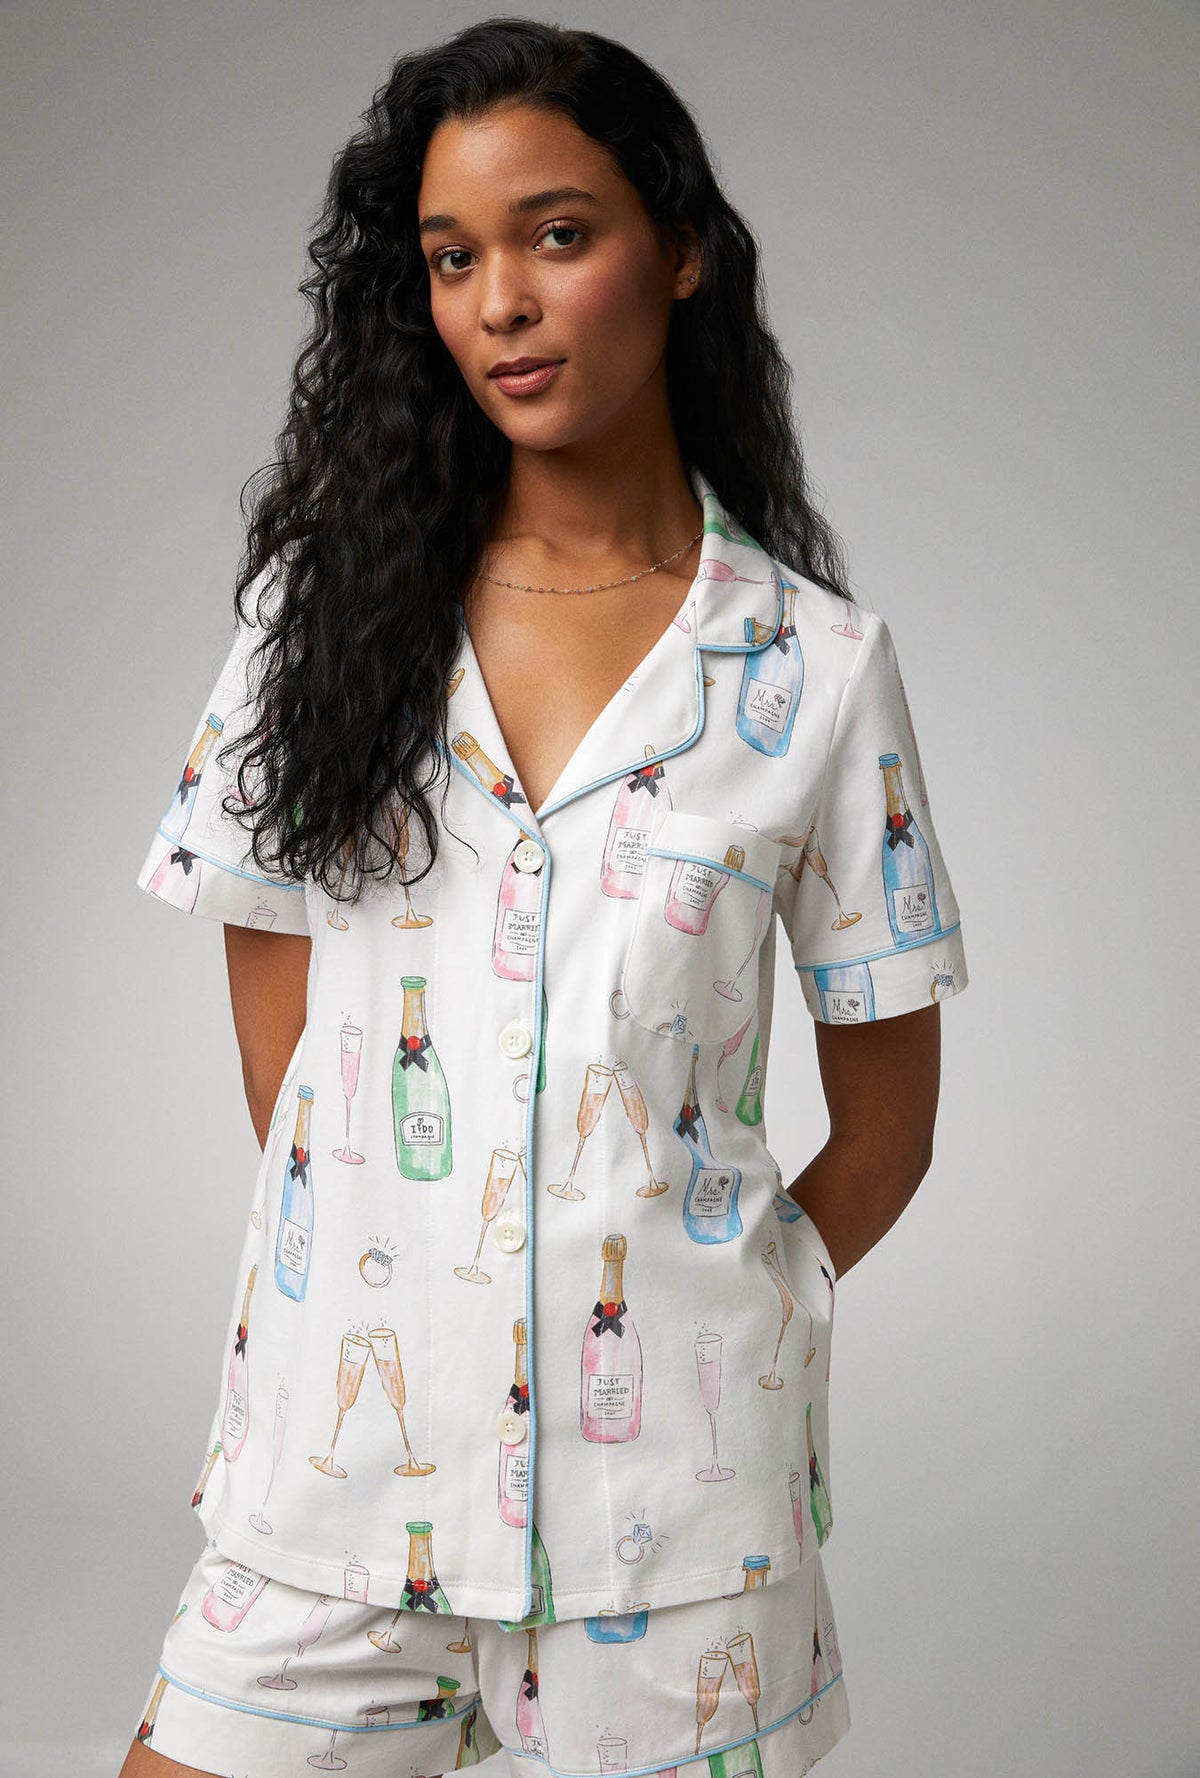 A lady wearing Short Sleeve Classic Shorty Stretch Jersey PJ Set with Champagne Wedding print